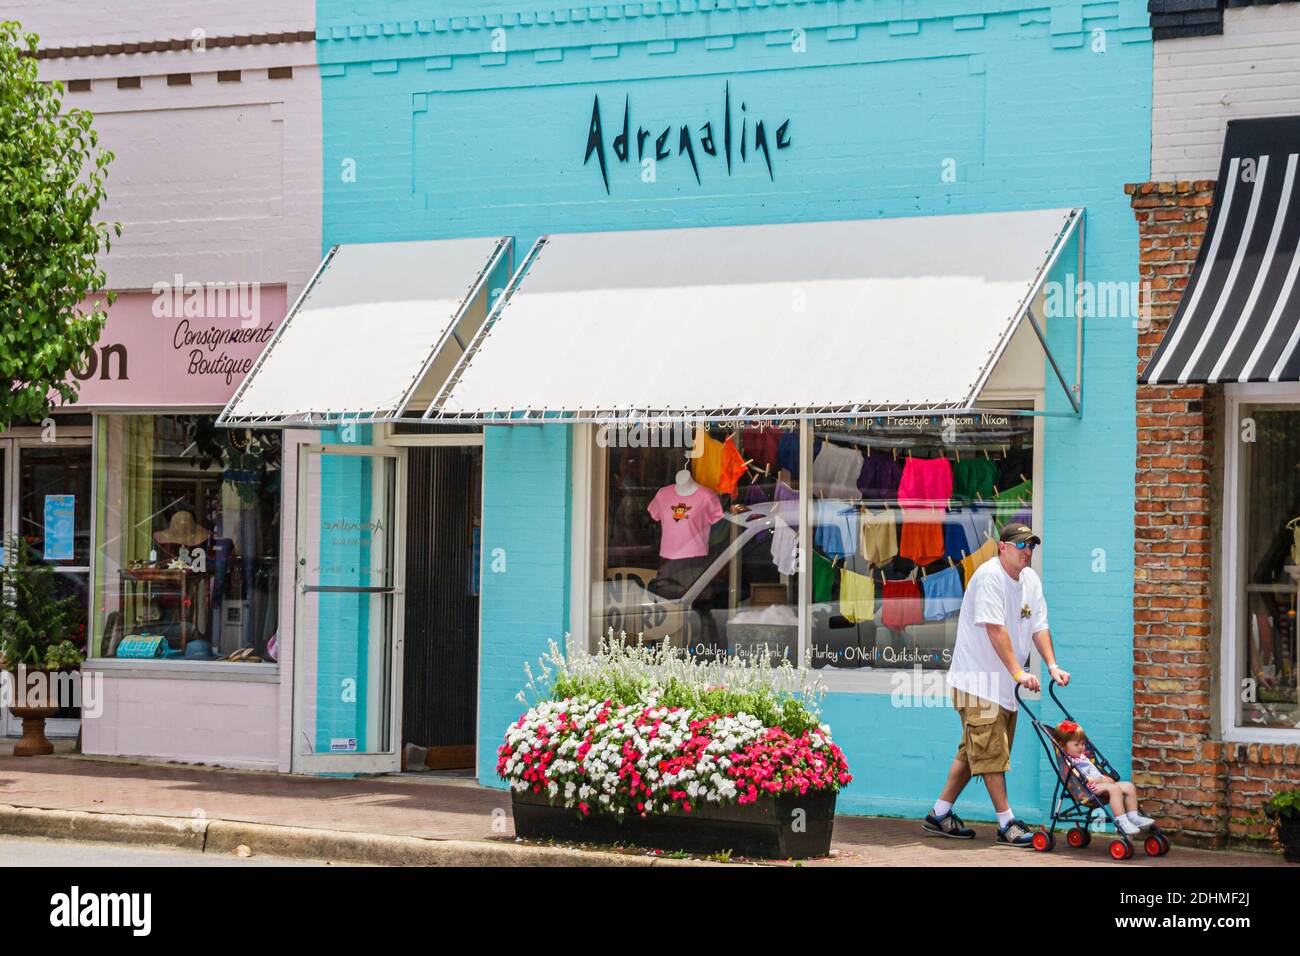 Alabama Fairhope shopping Adrenaline Boutique clothing store front entrance, Stock Photo